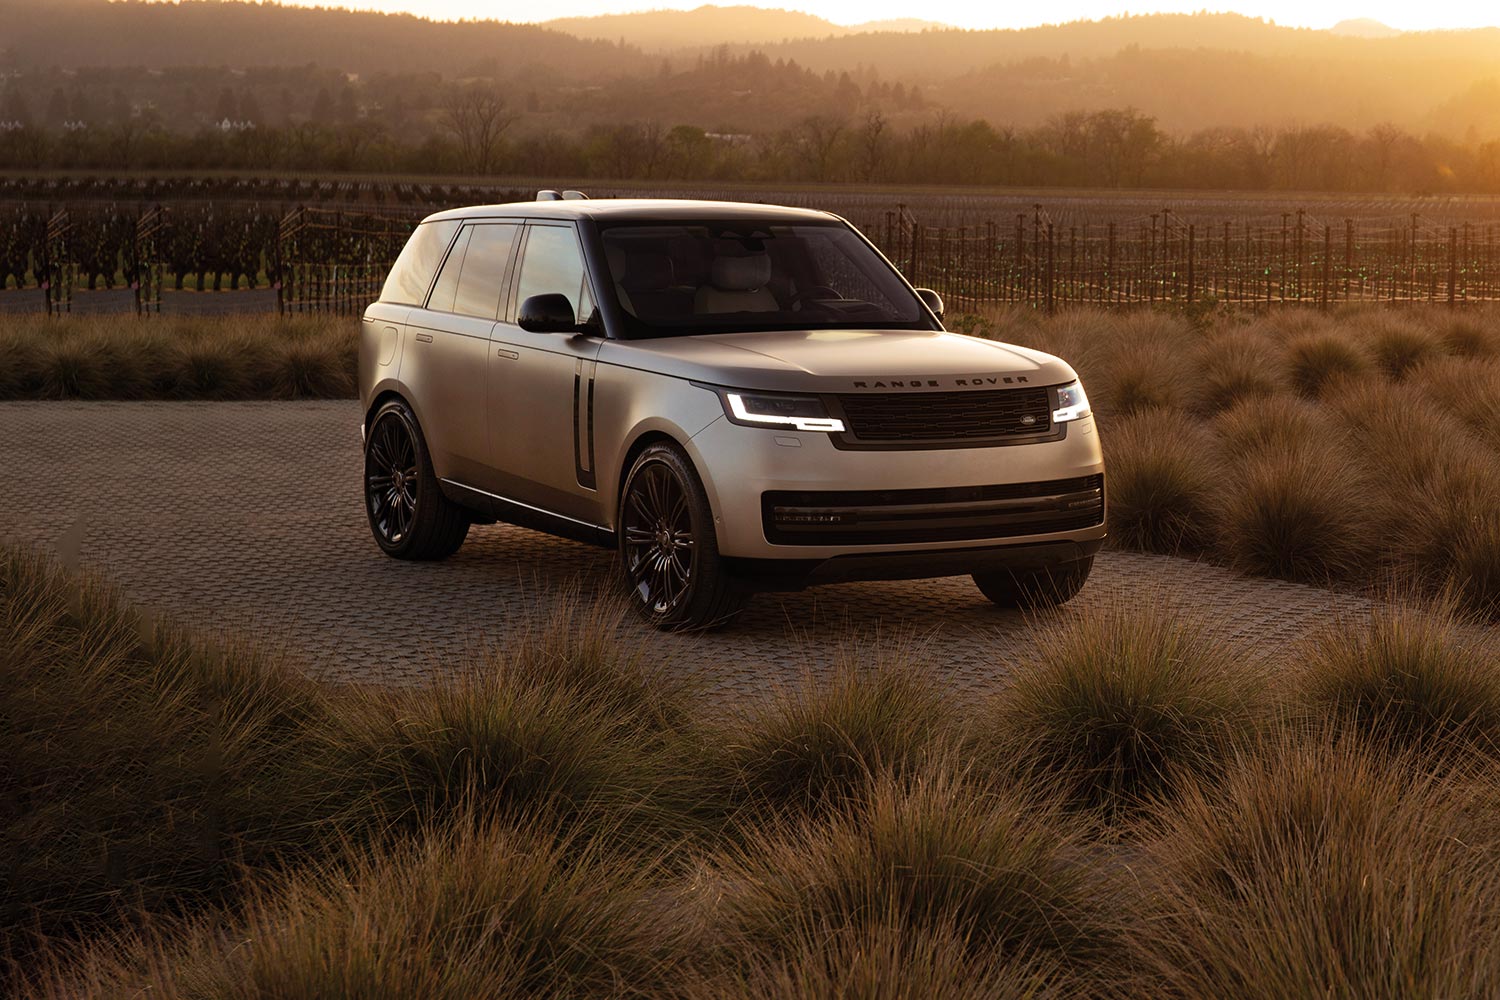 Range Rover – Don’t Dilly-Dally, Love